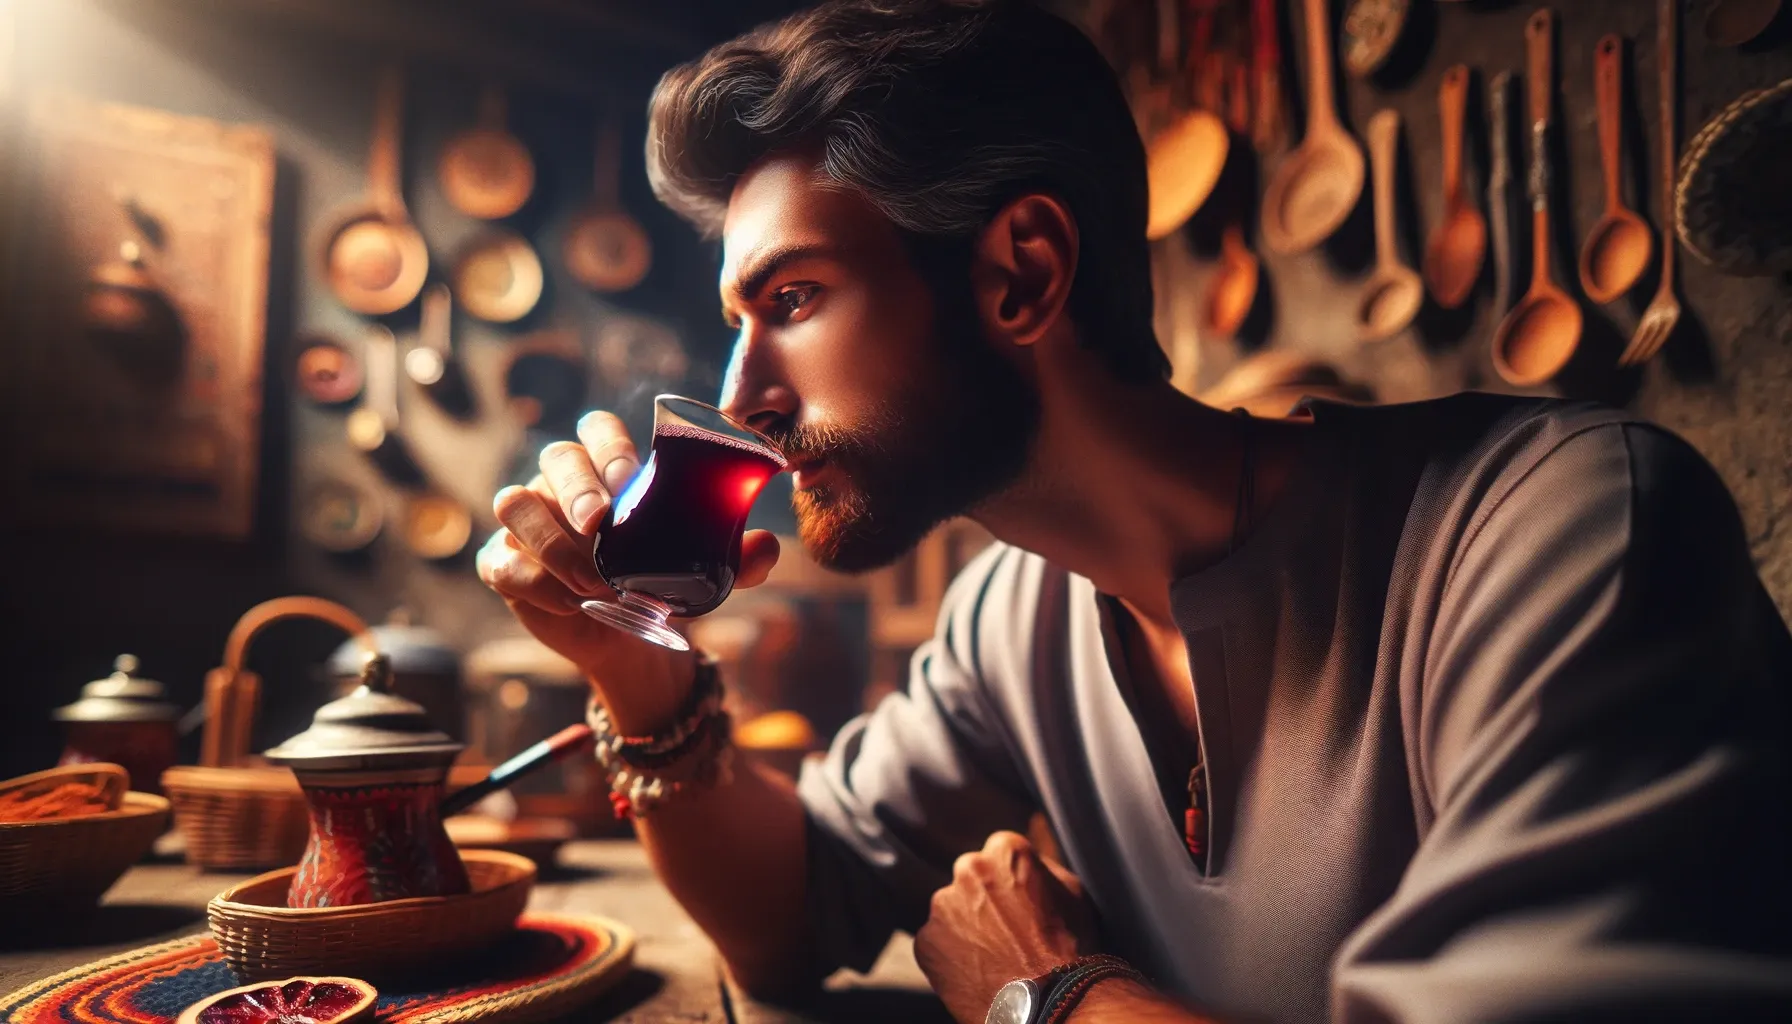 a man drinking Salgam Suyu in a traditional Turkish kitchen or dining environment